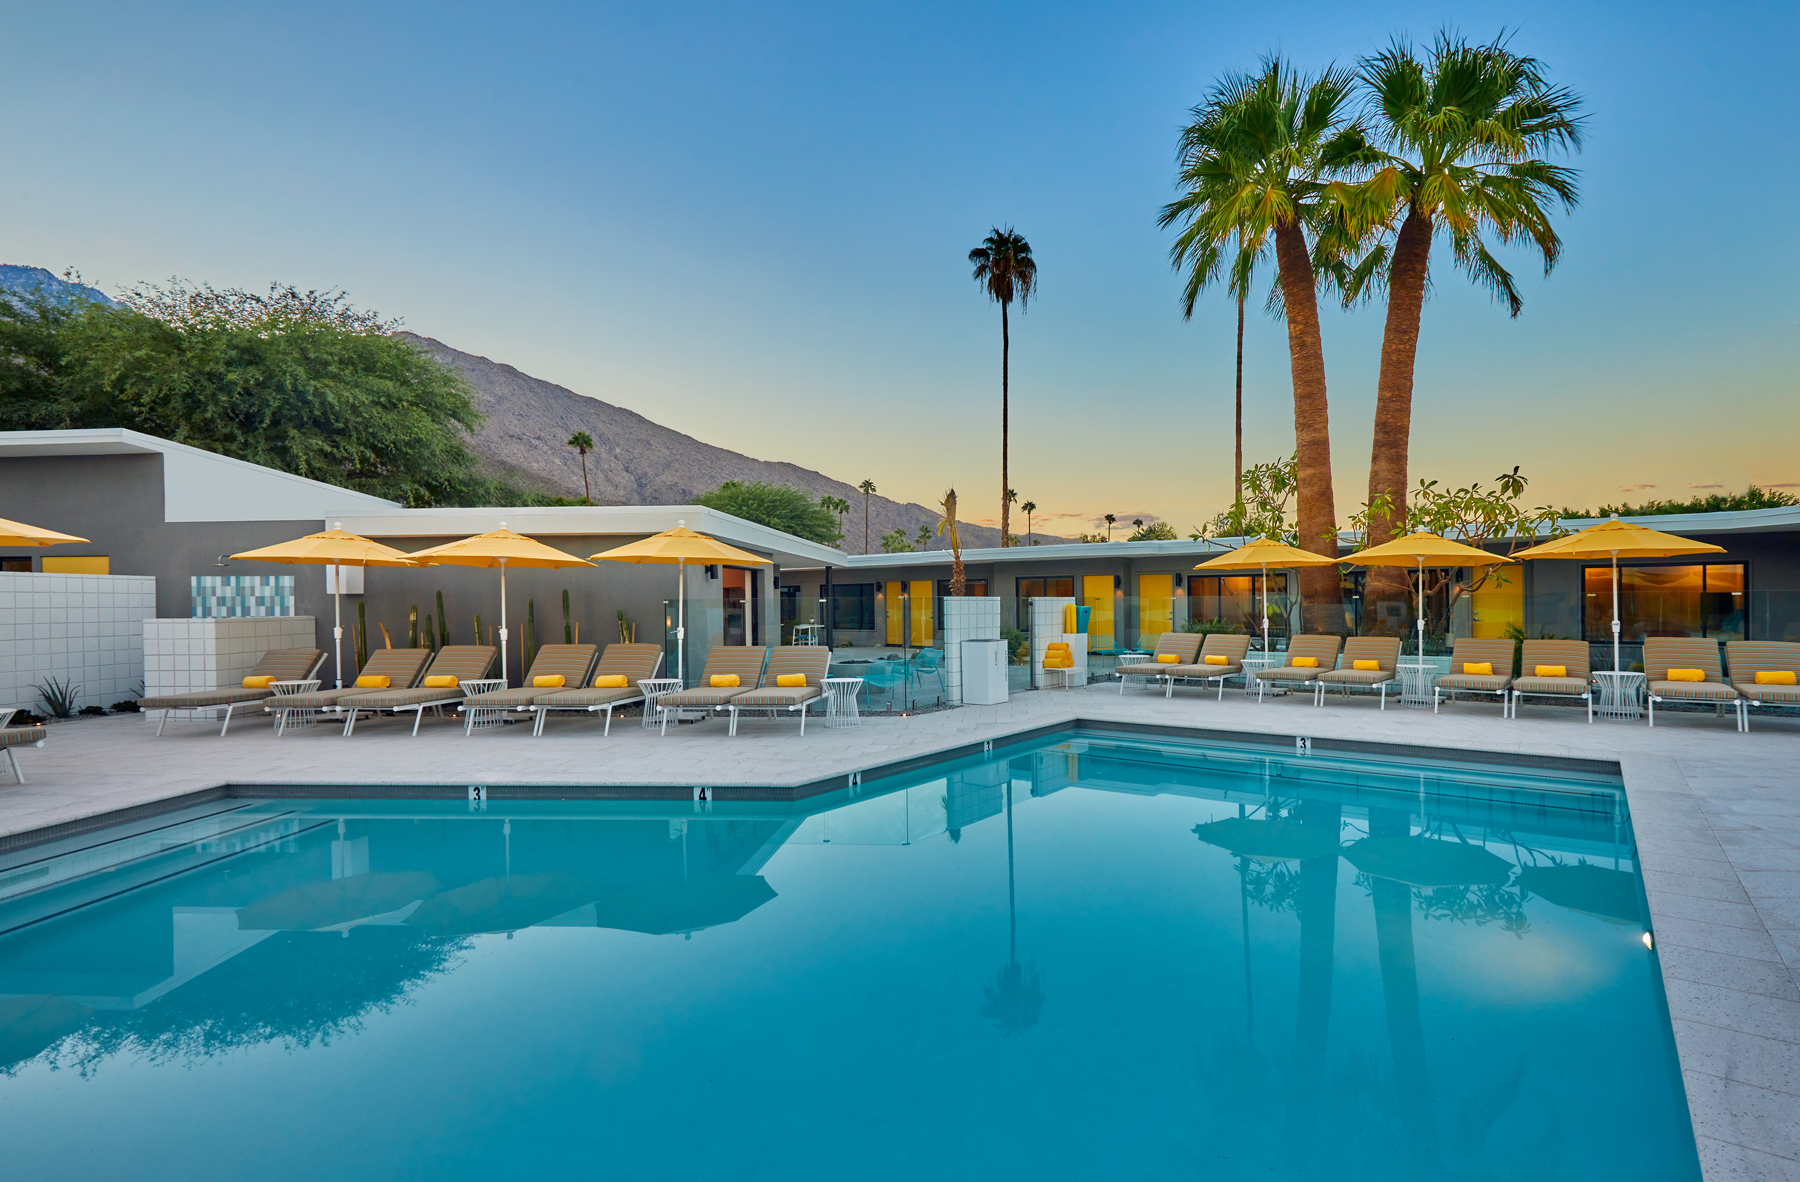 The Third Times A Charm With Twin Palms Resort Palm Springs Preferred Small Hotels